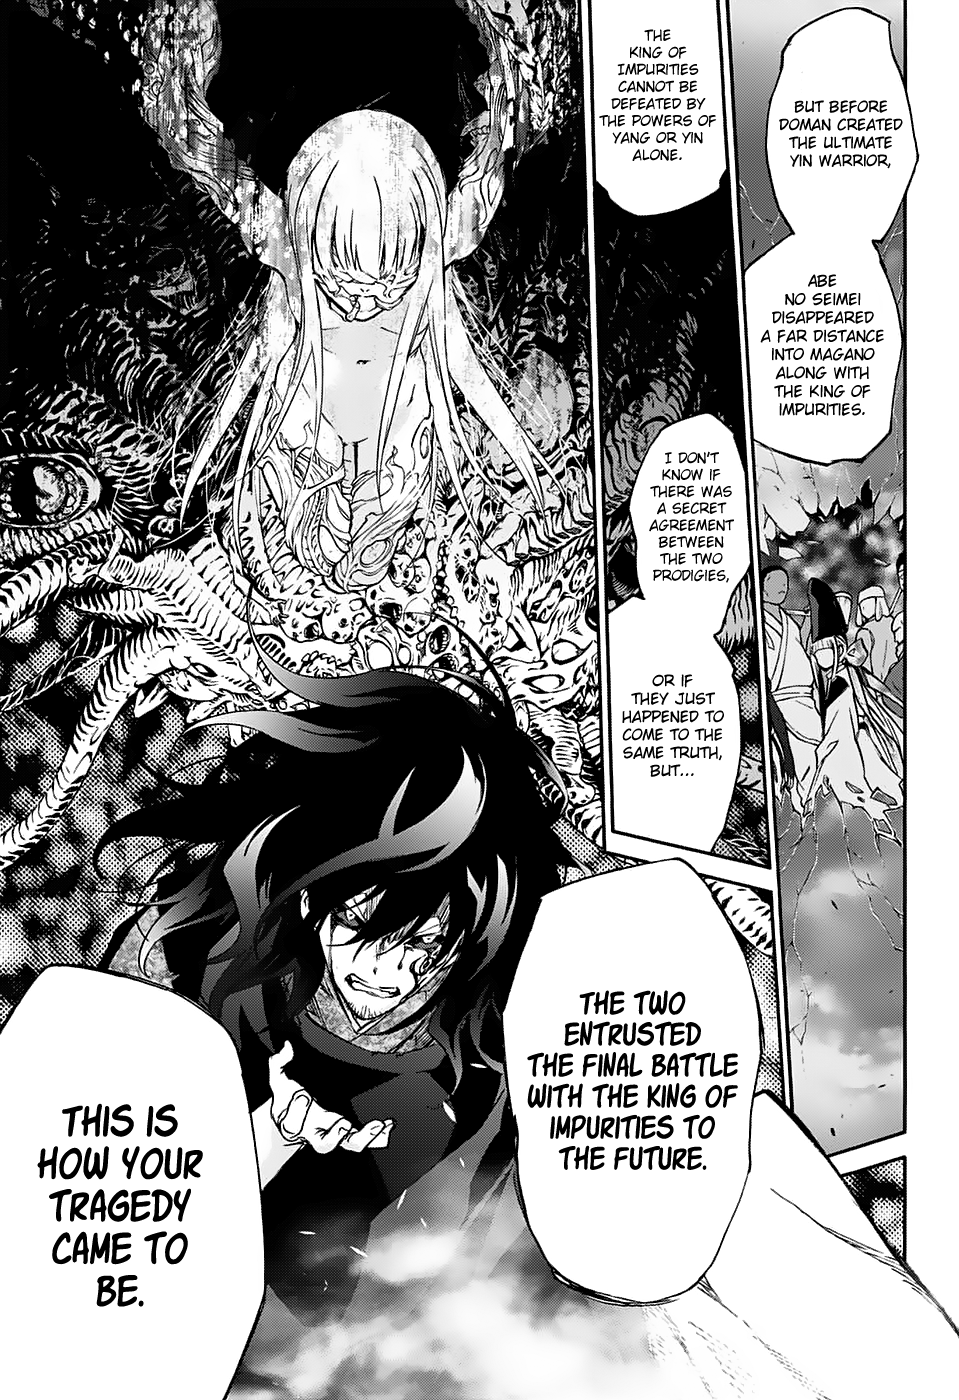 Twin Star Exorcists 52